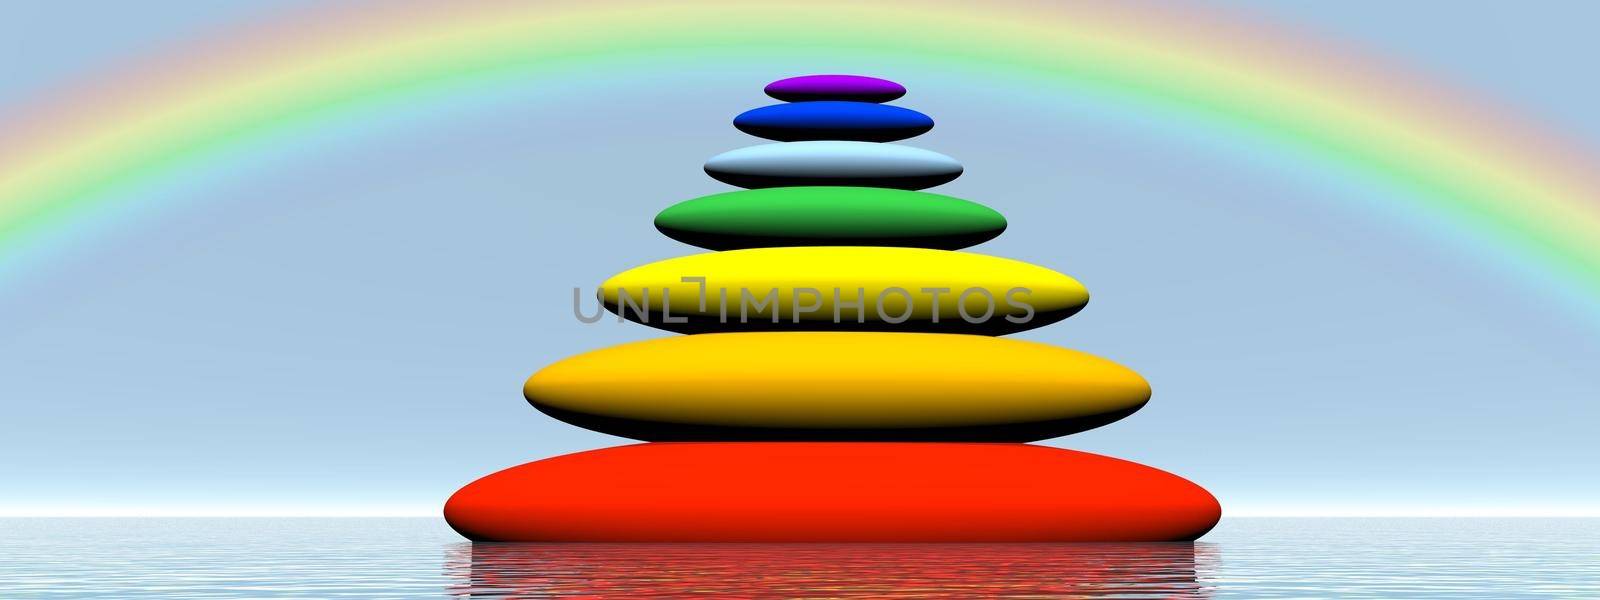 Seven stones with chakra colors in balance upon the water under rainbow